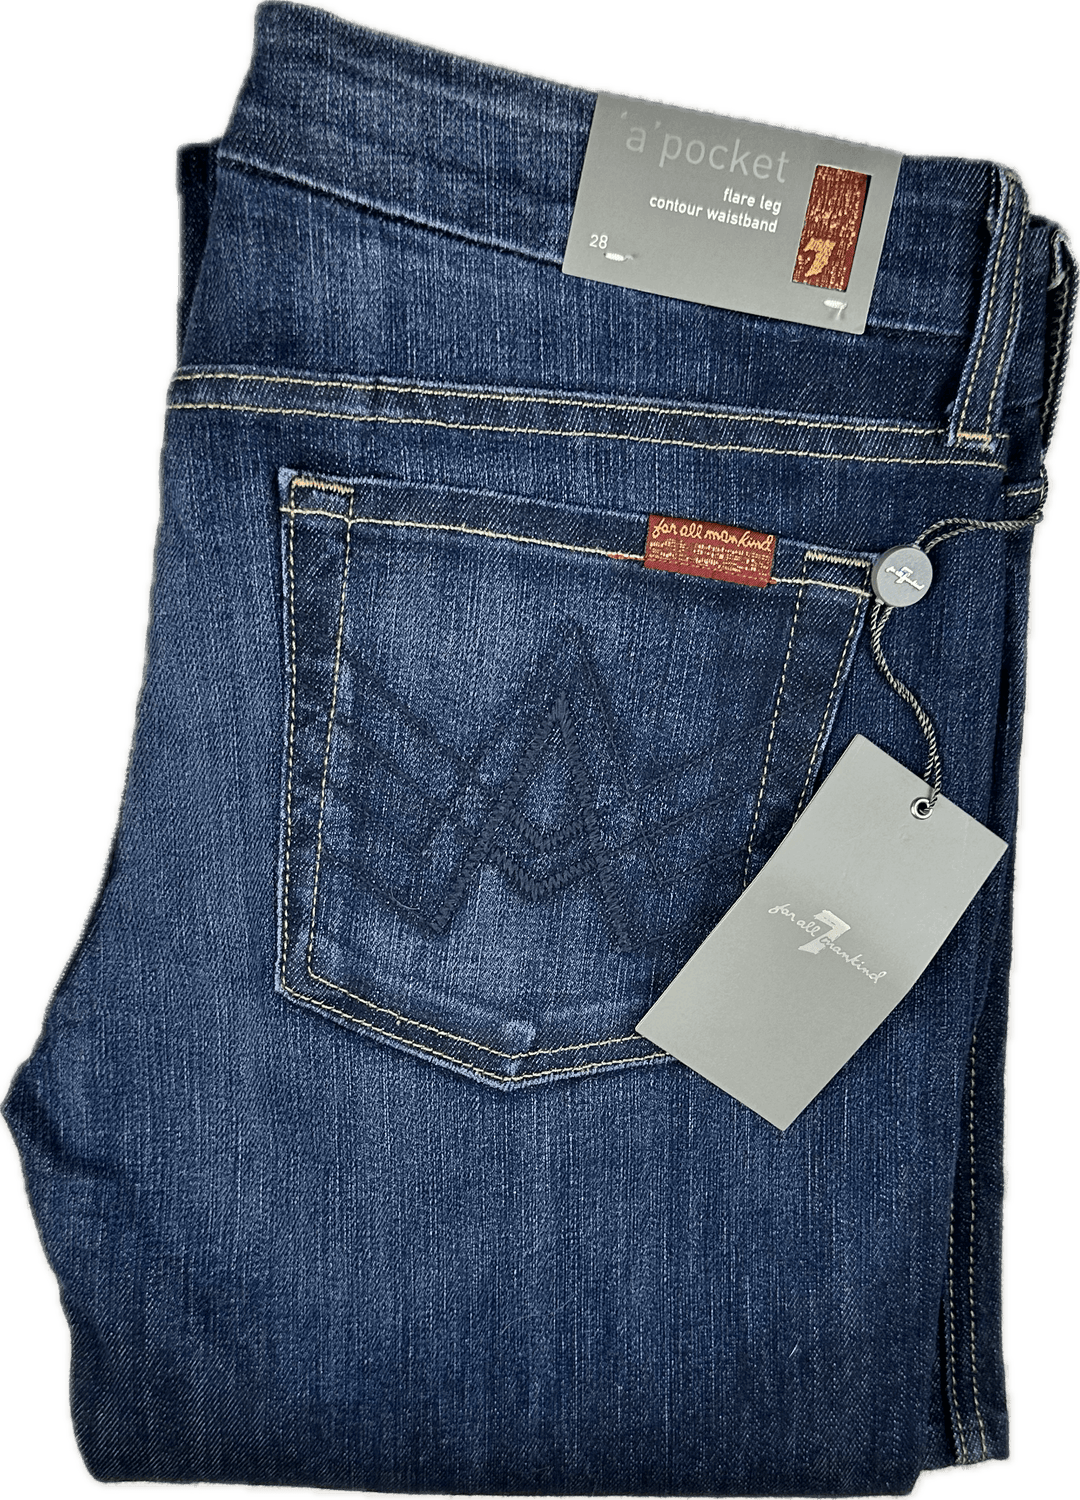 NWT- 7 for all Mankind 'A Pocket' Flare Leg Jeans Size- 28 - Jean Pool